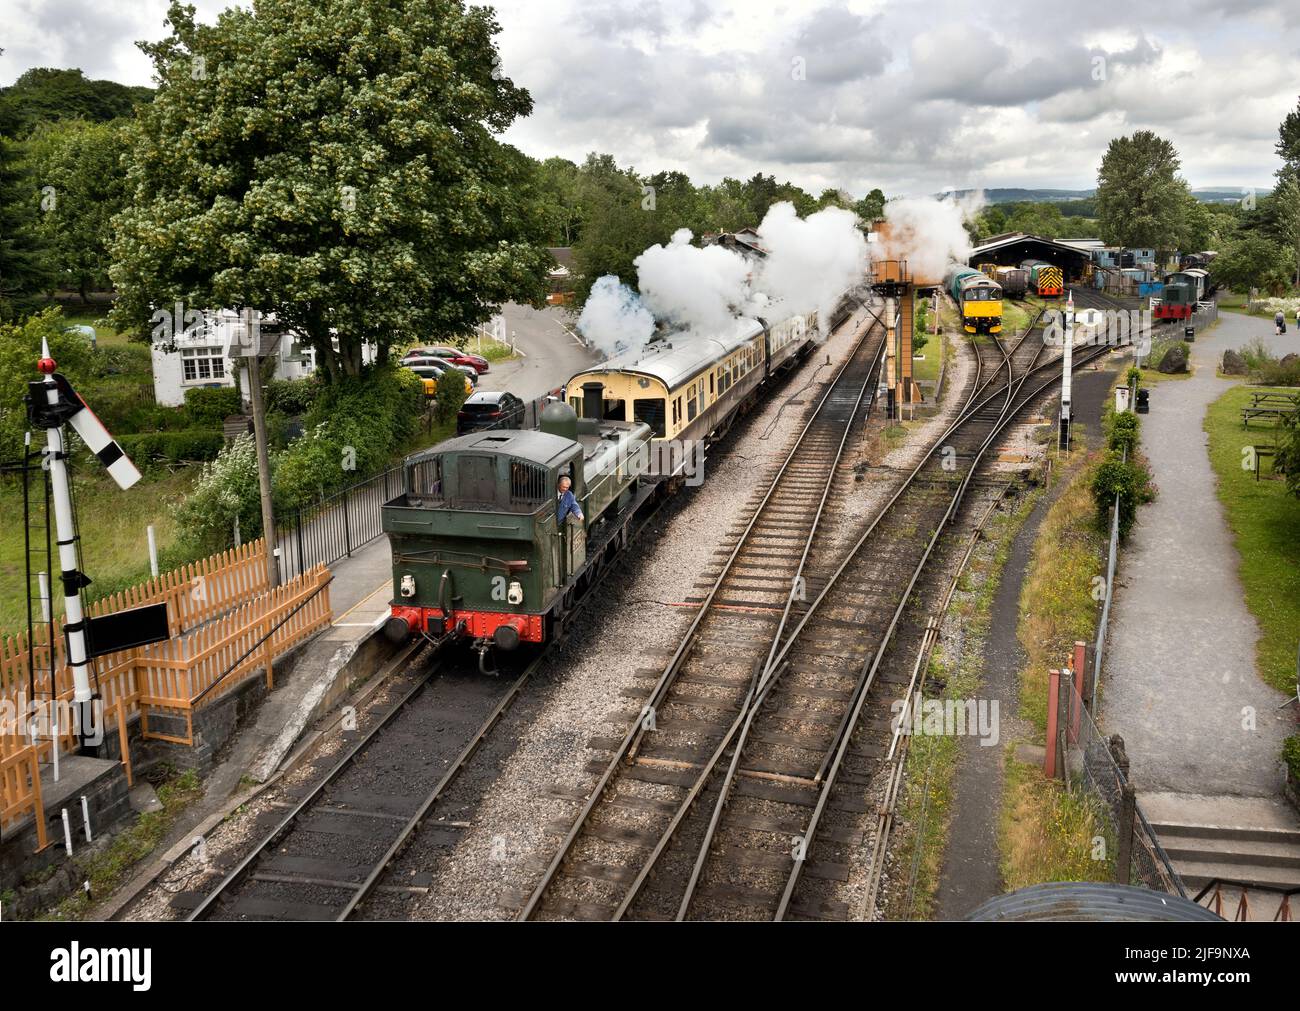 A tank engine takes a train out of Buckfastleigh Station, on the South Devon Railway heritage line, Devon. Stock Photo